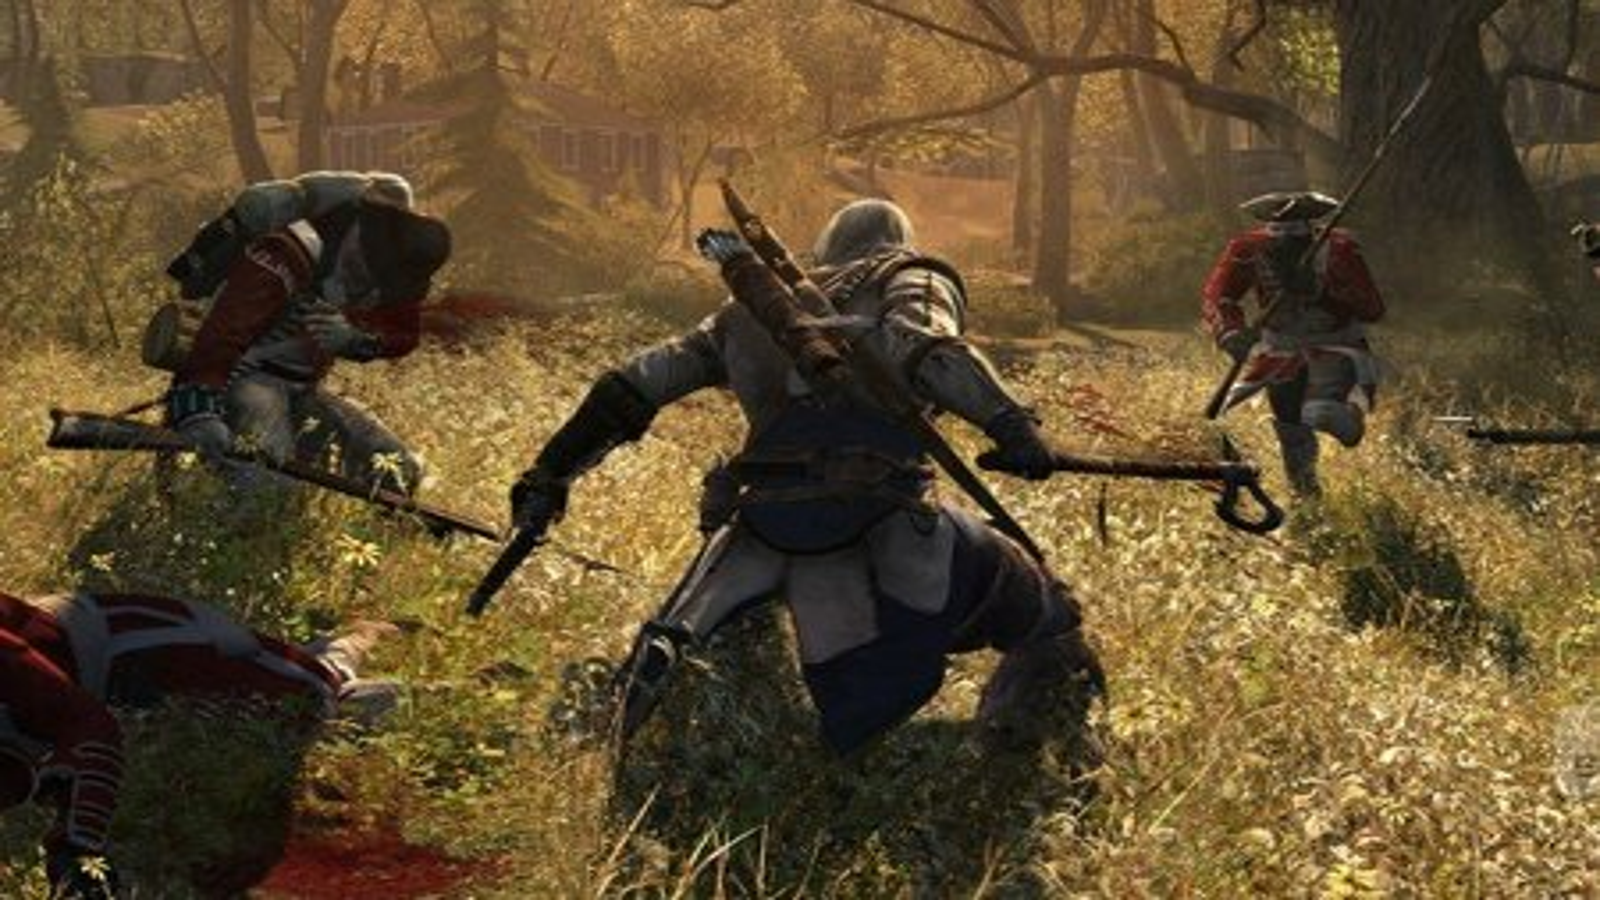 Assassin's creed 3 review : r/assassinscreed3